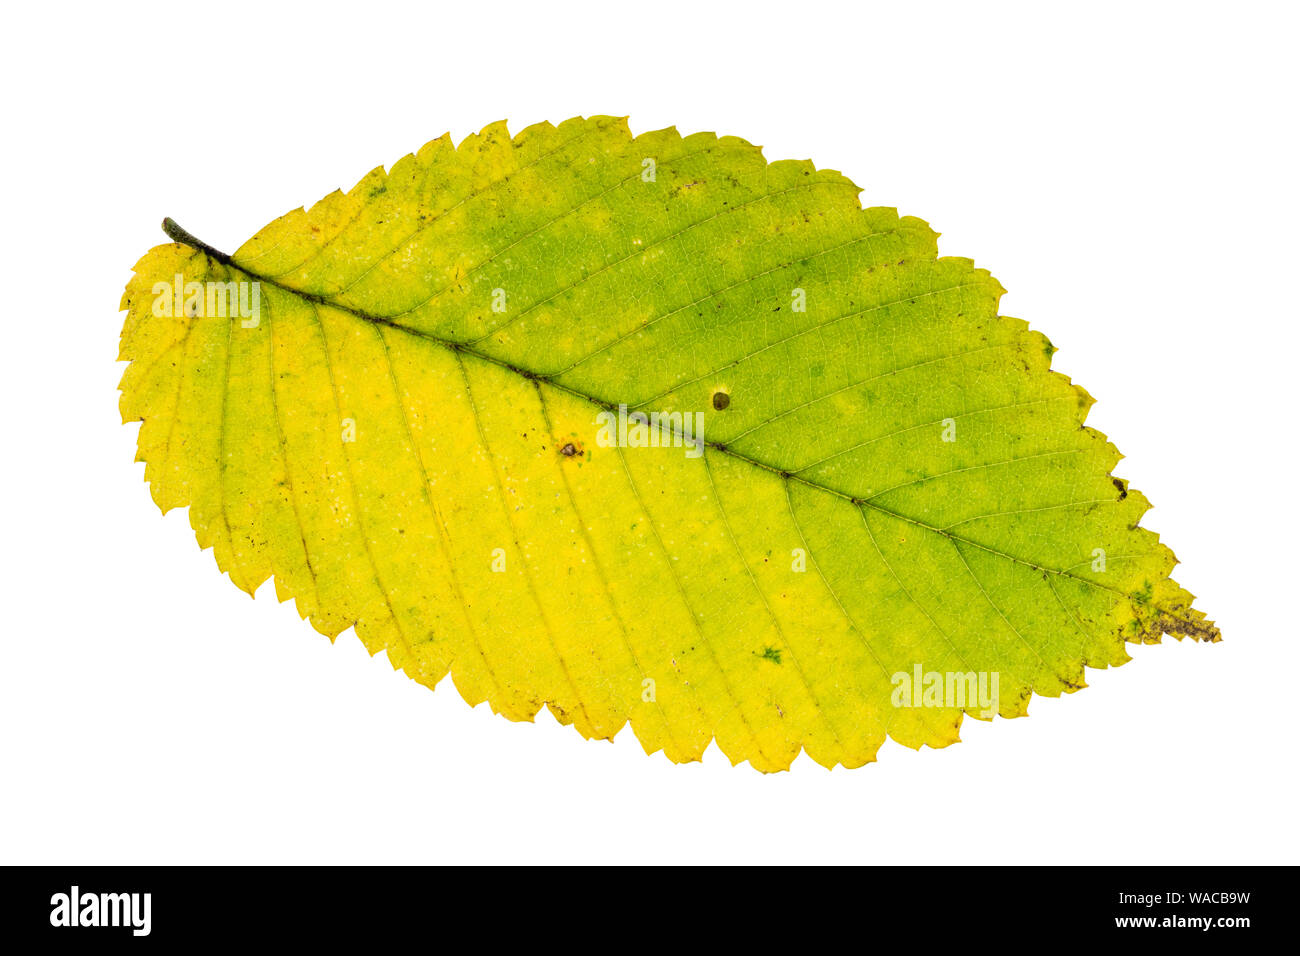 autumn yellow and green leaf of elm tree cutout on white background Stock Photo